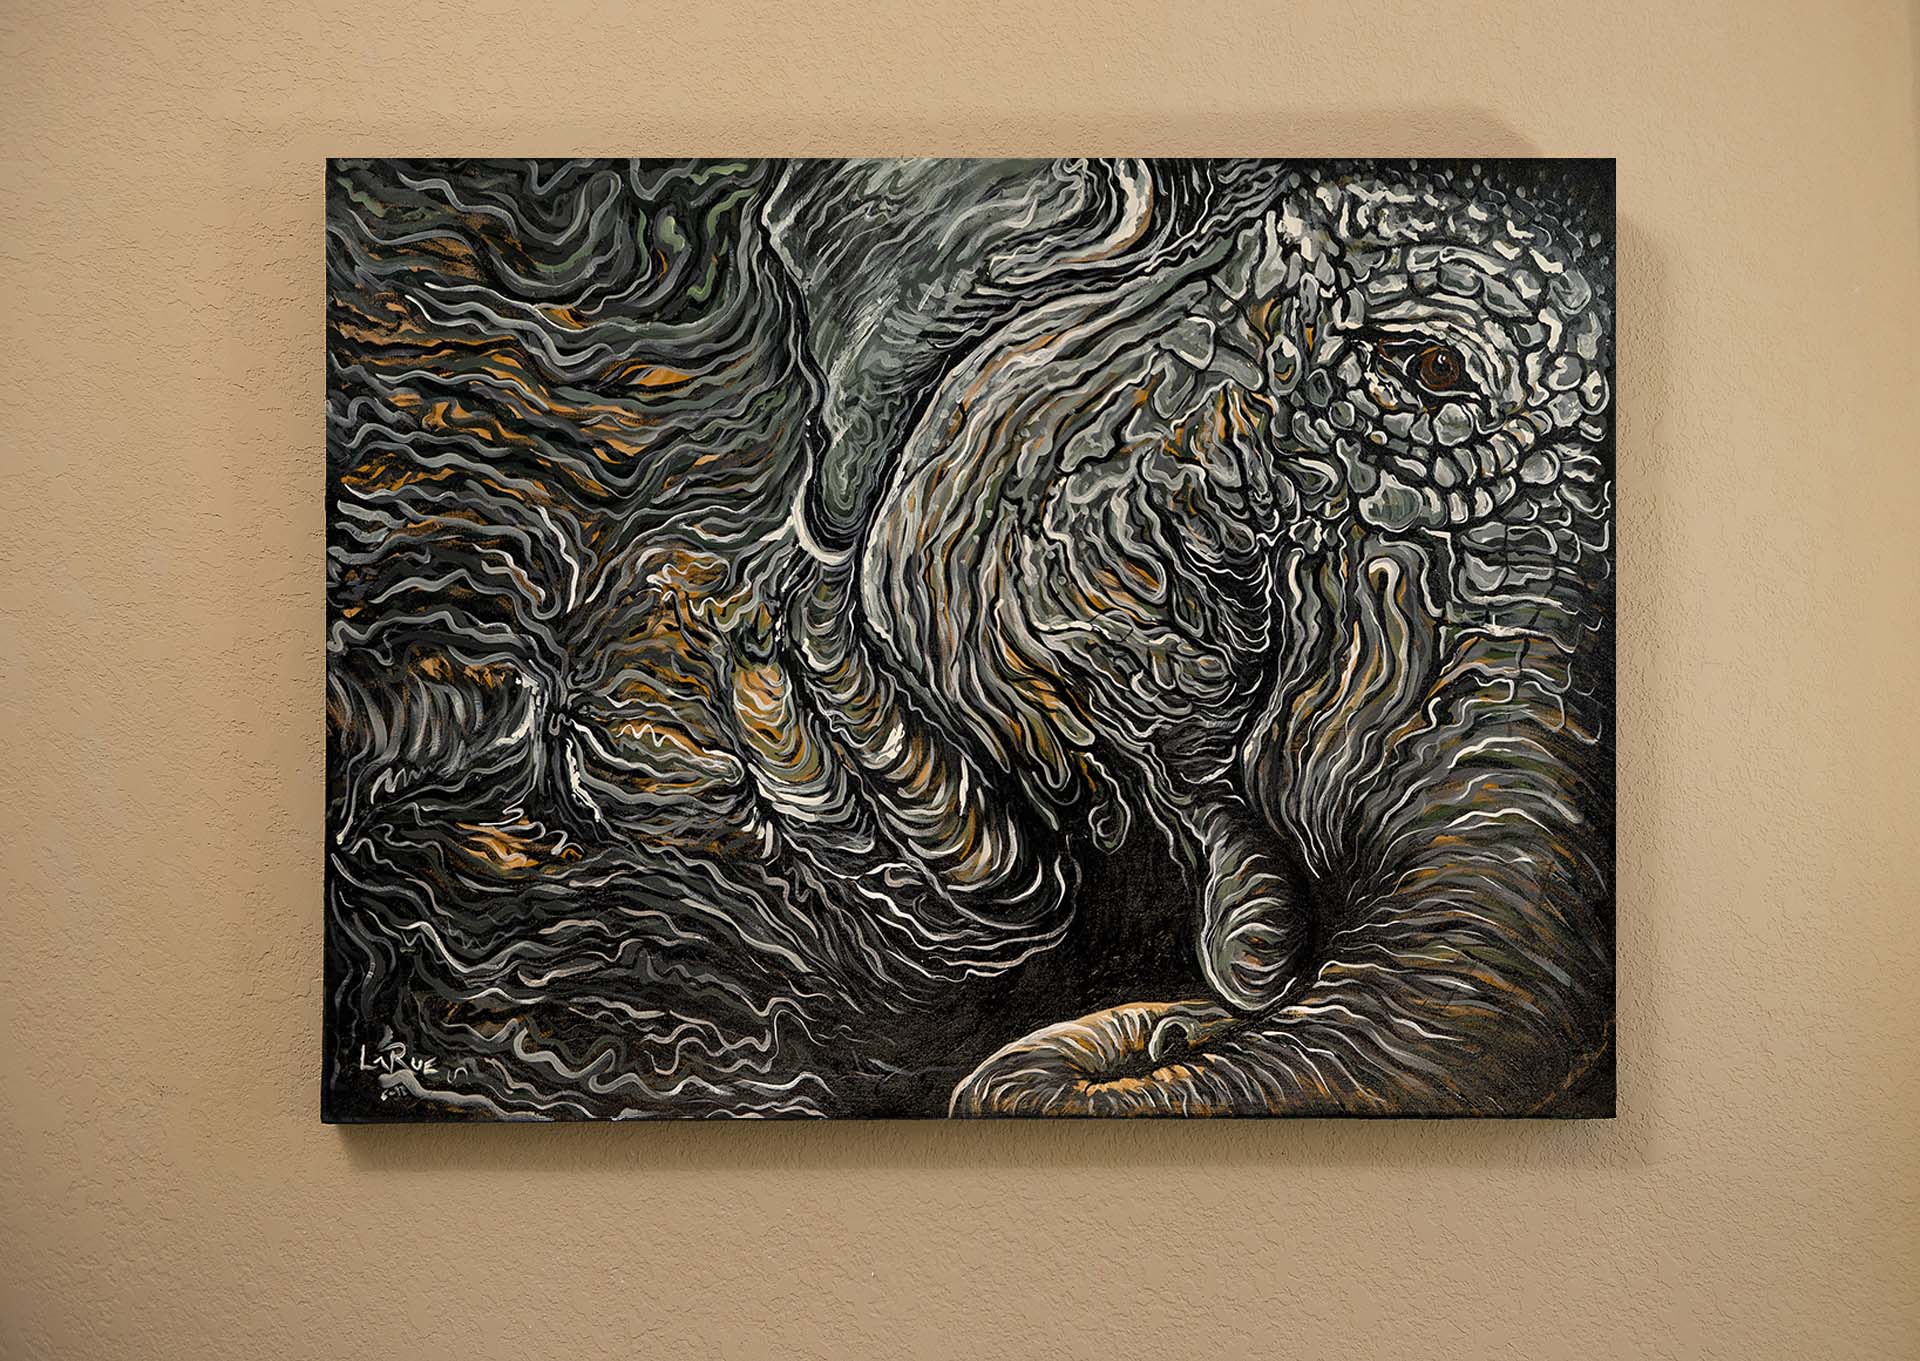 Waking Elephant is a figurative abstract painting on canvas